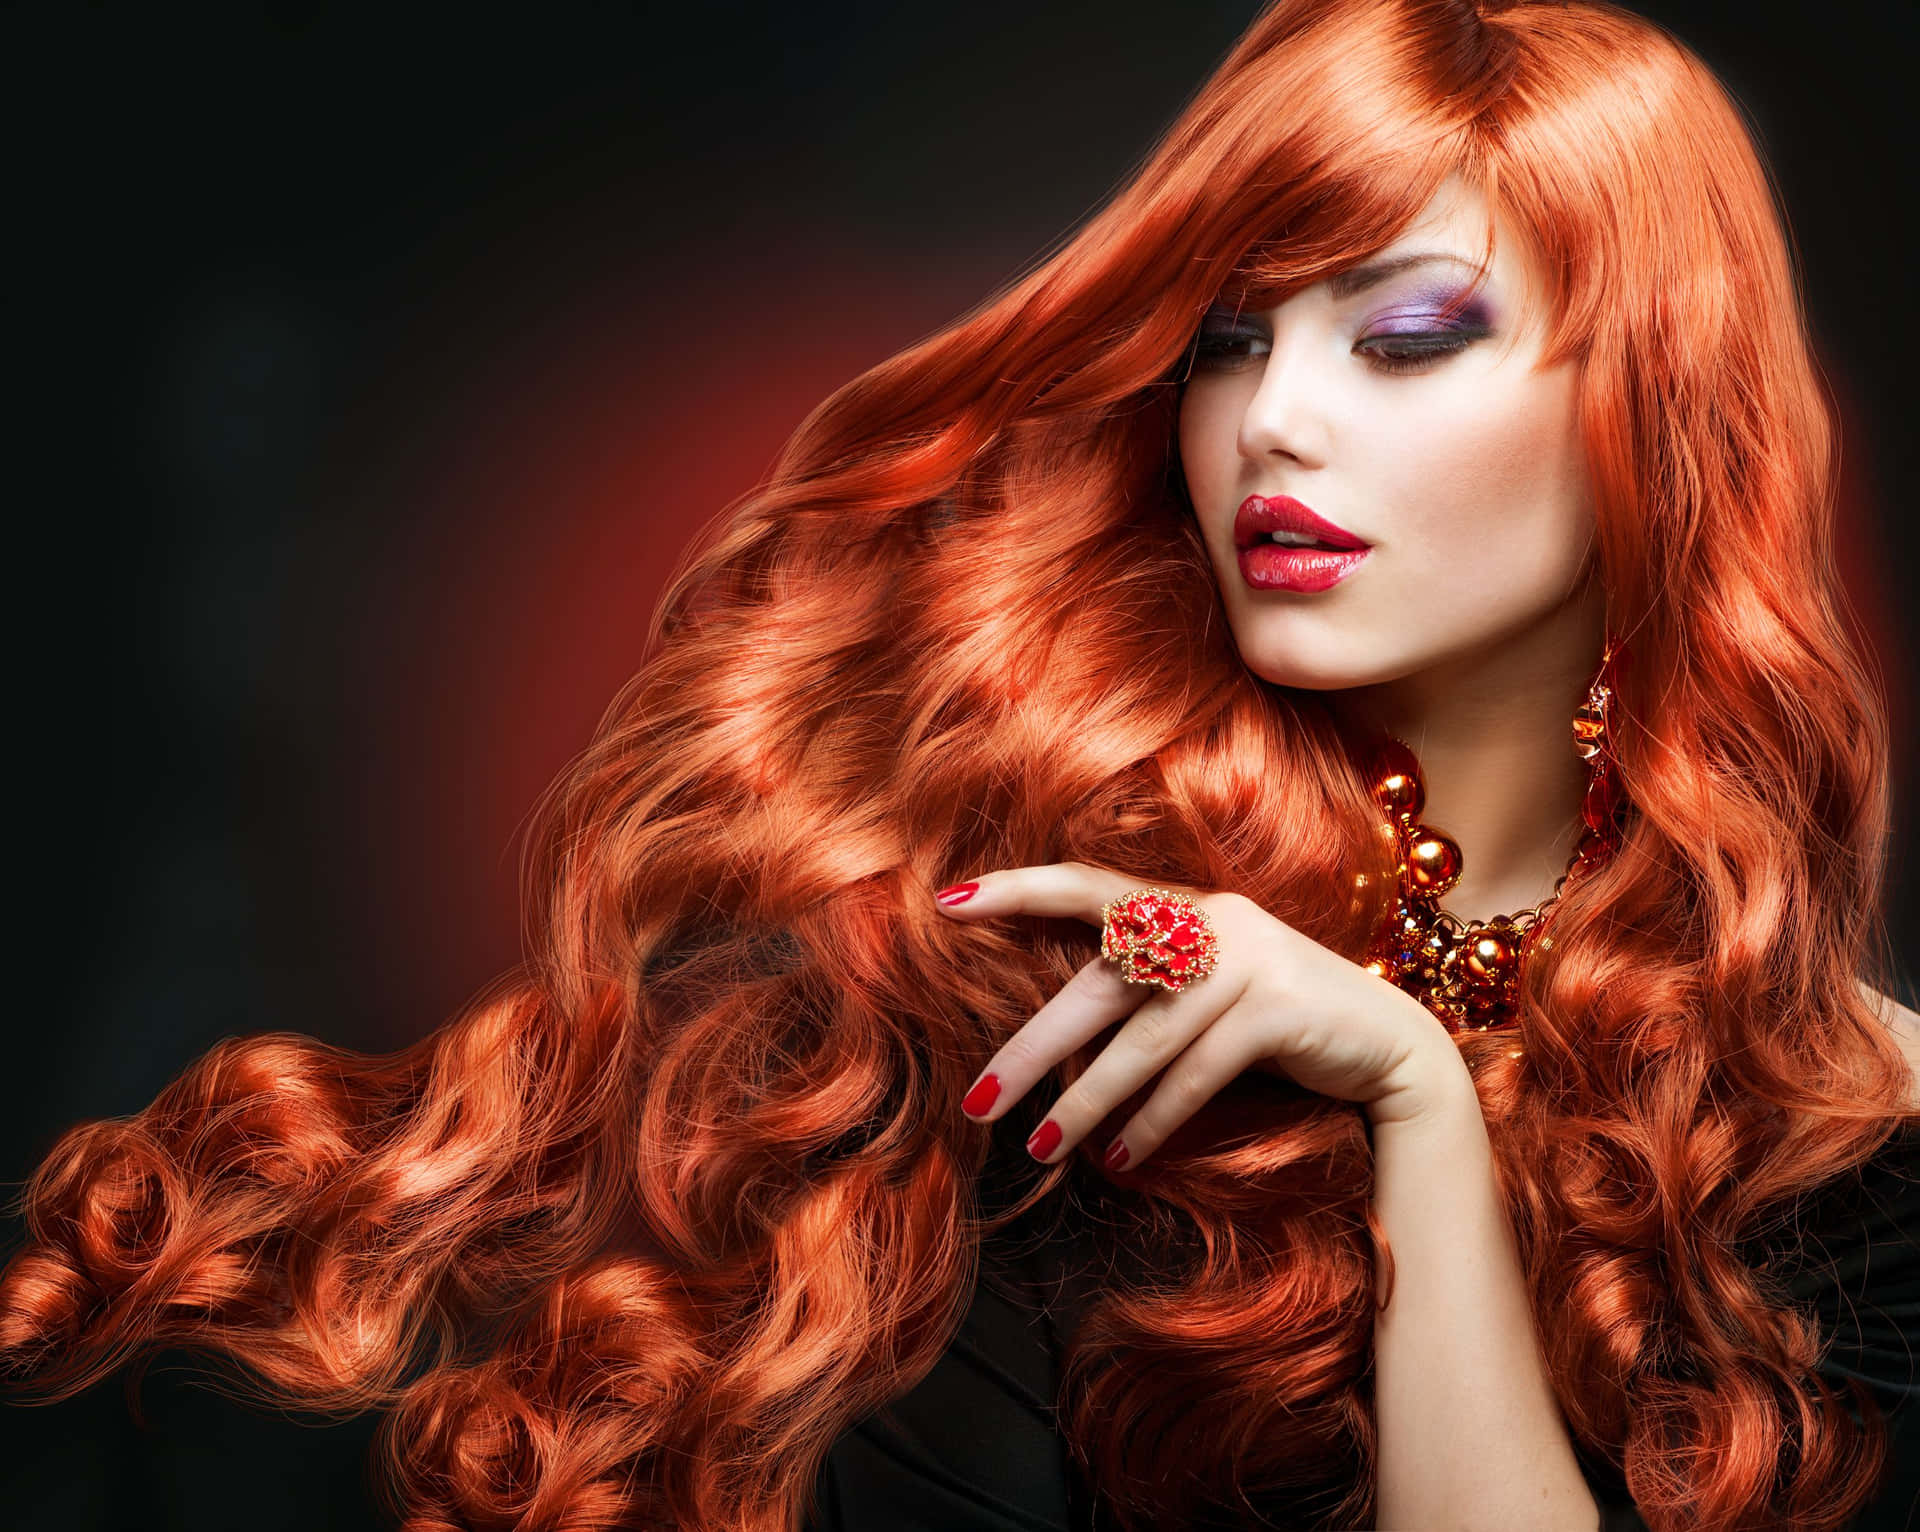 A Beautiful Woman With Long Red Hair